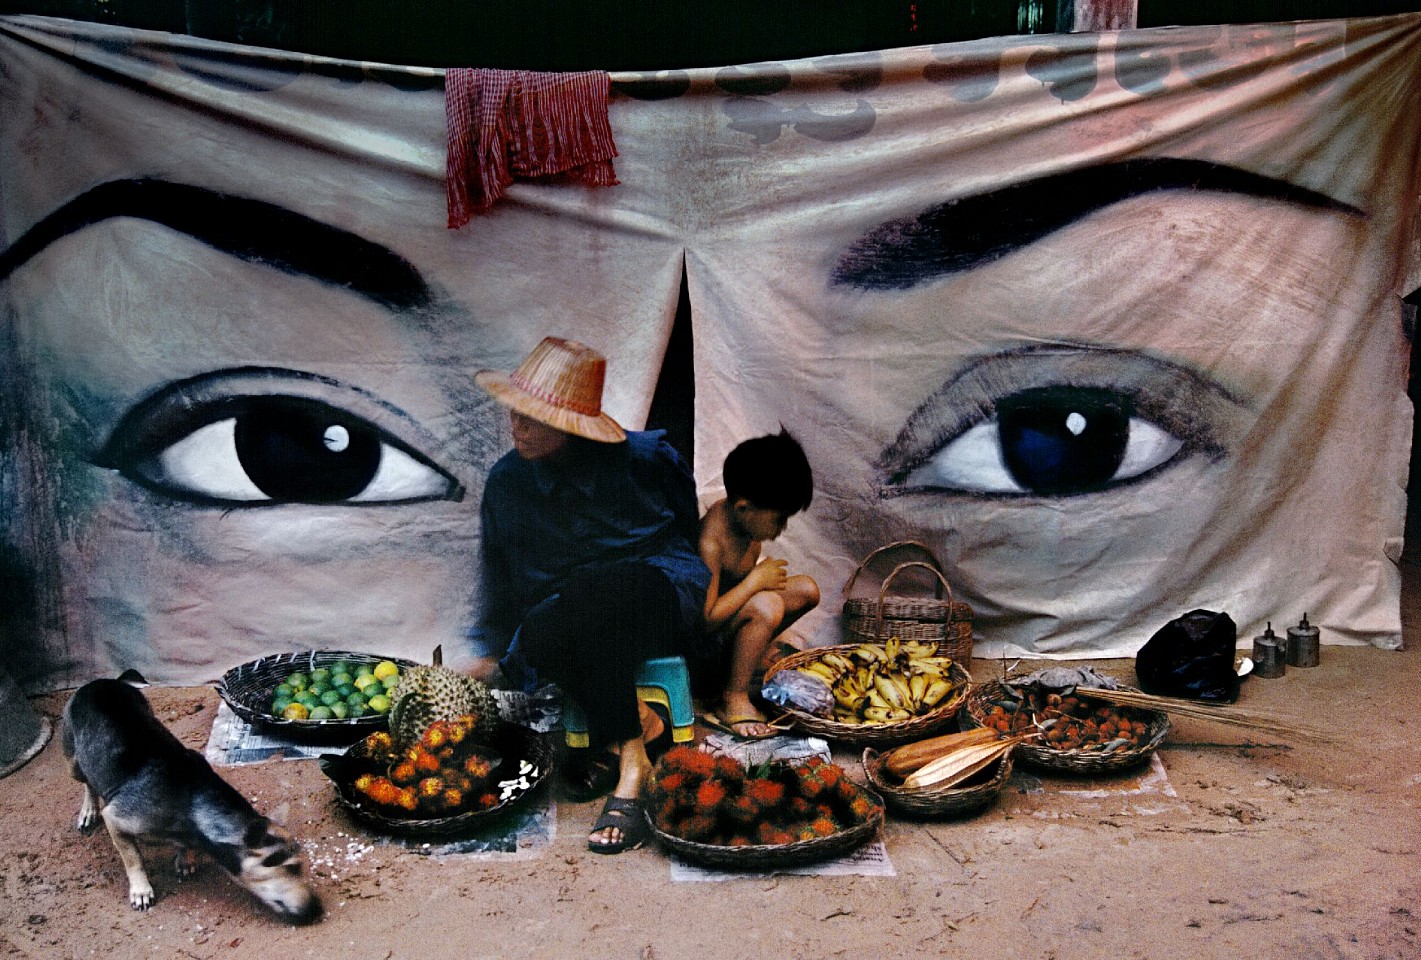 Steve McCurry, Mother and Son Street Vendor, 1998
FujiFlex Crystal Archive Print
Price/Size on request